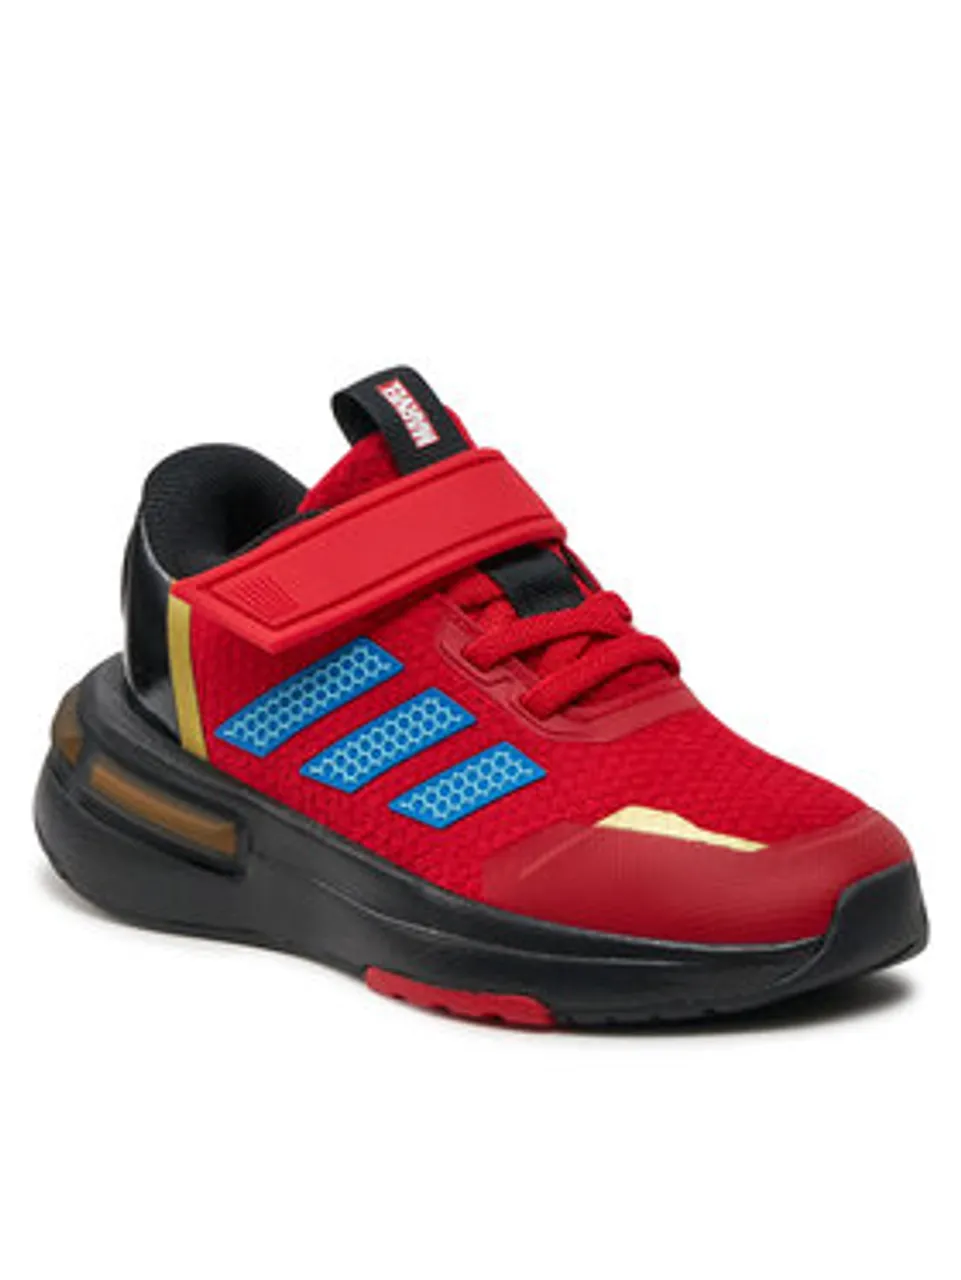 adidas Sneakers Marvel's Iron Man Racer Kids IG3559 Rot